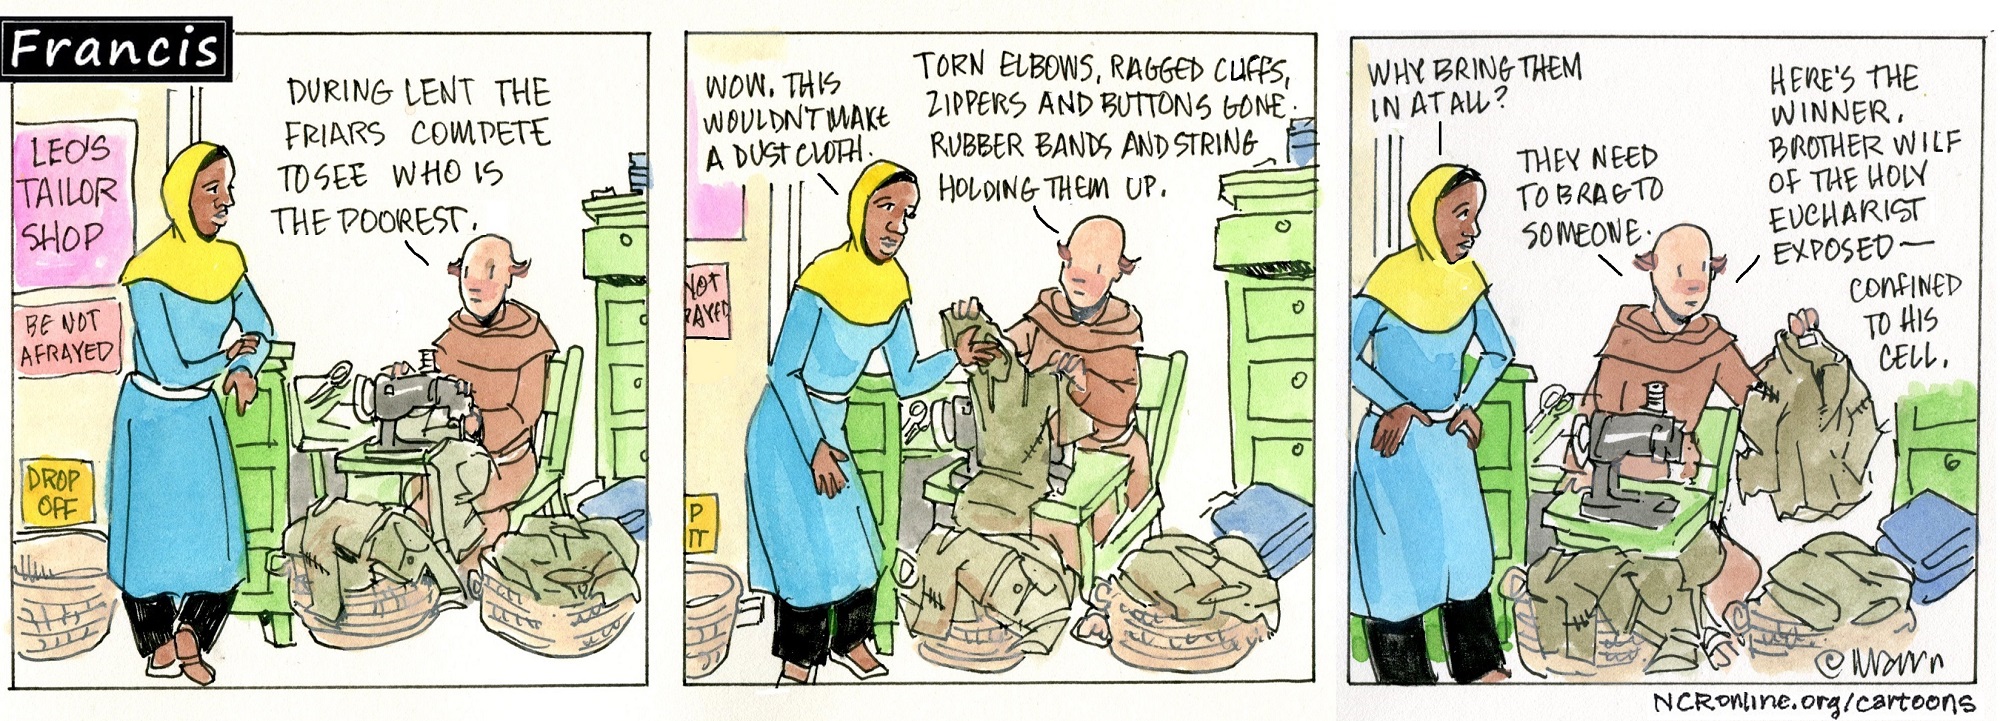 Francis, the comic strip: Brother Leo's tailor shop is host to a Lenten competition among the friars.